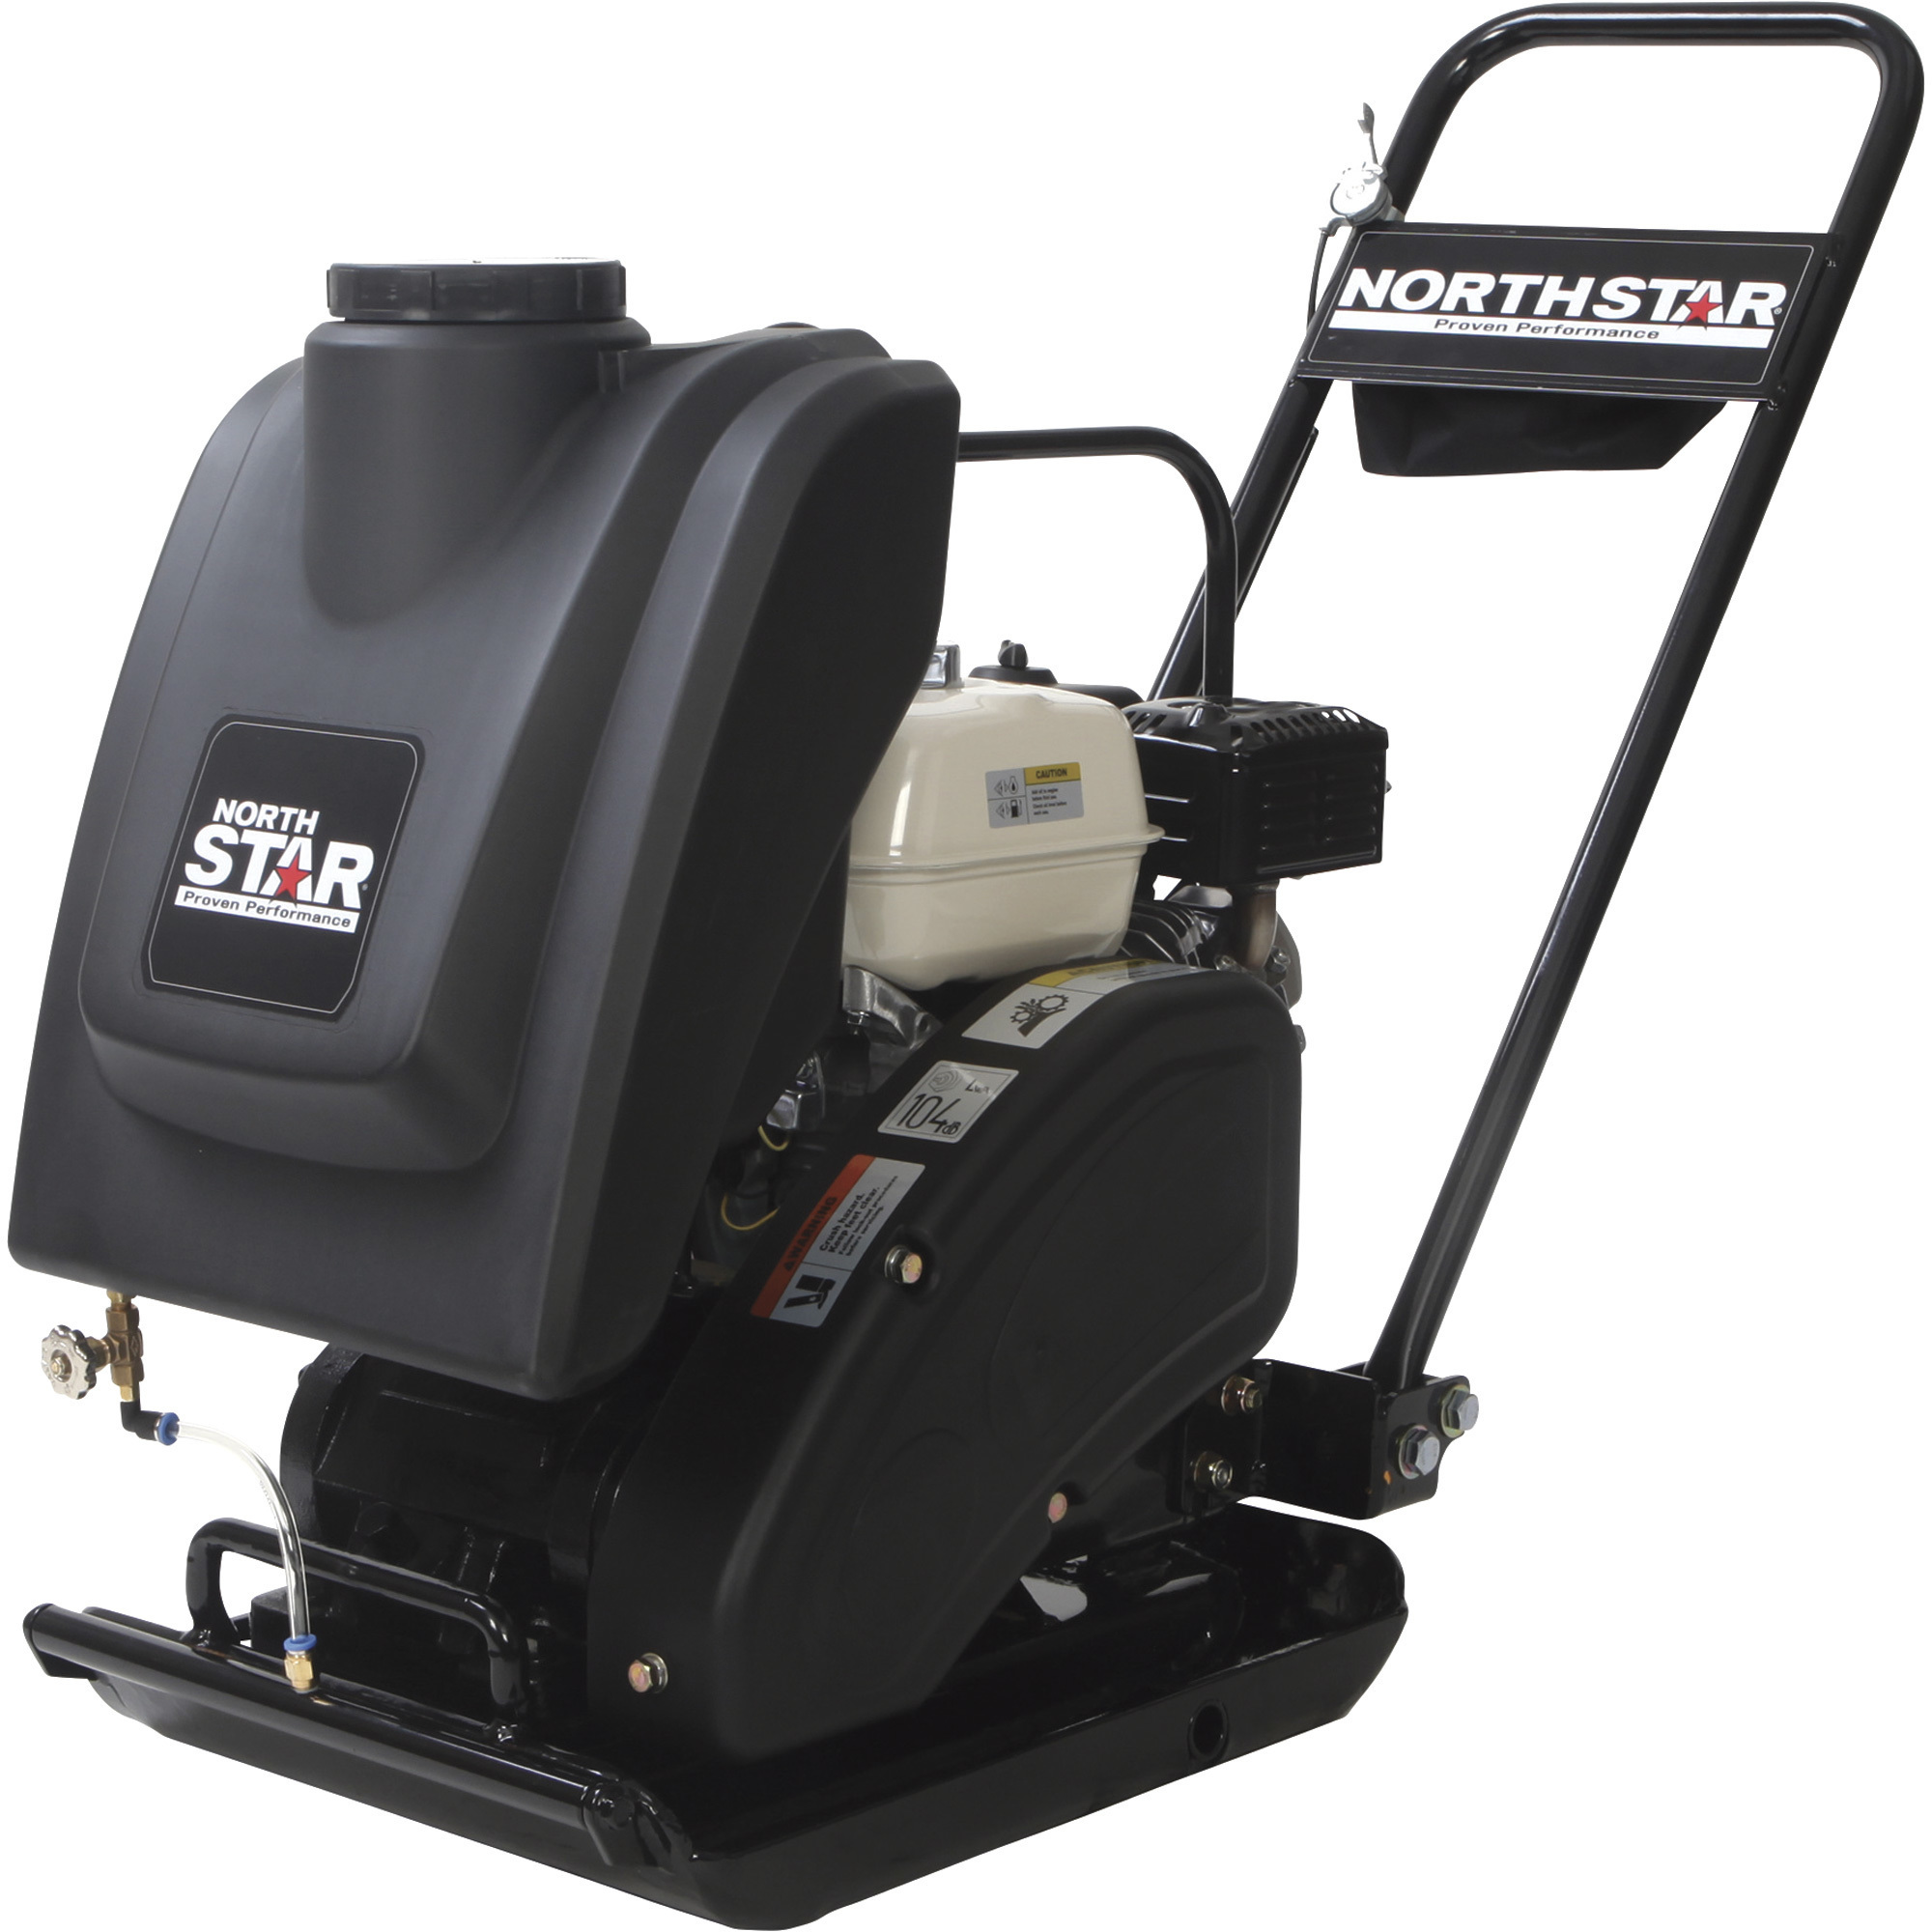 NorthStar Single-Direction Plate Compactor with Water Tank â With 5.5 HP Honda GX160 Engine